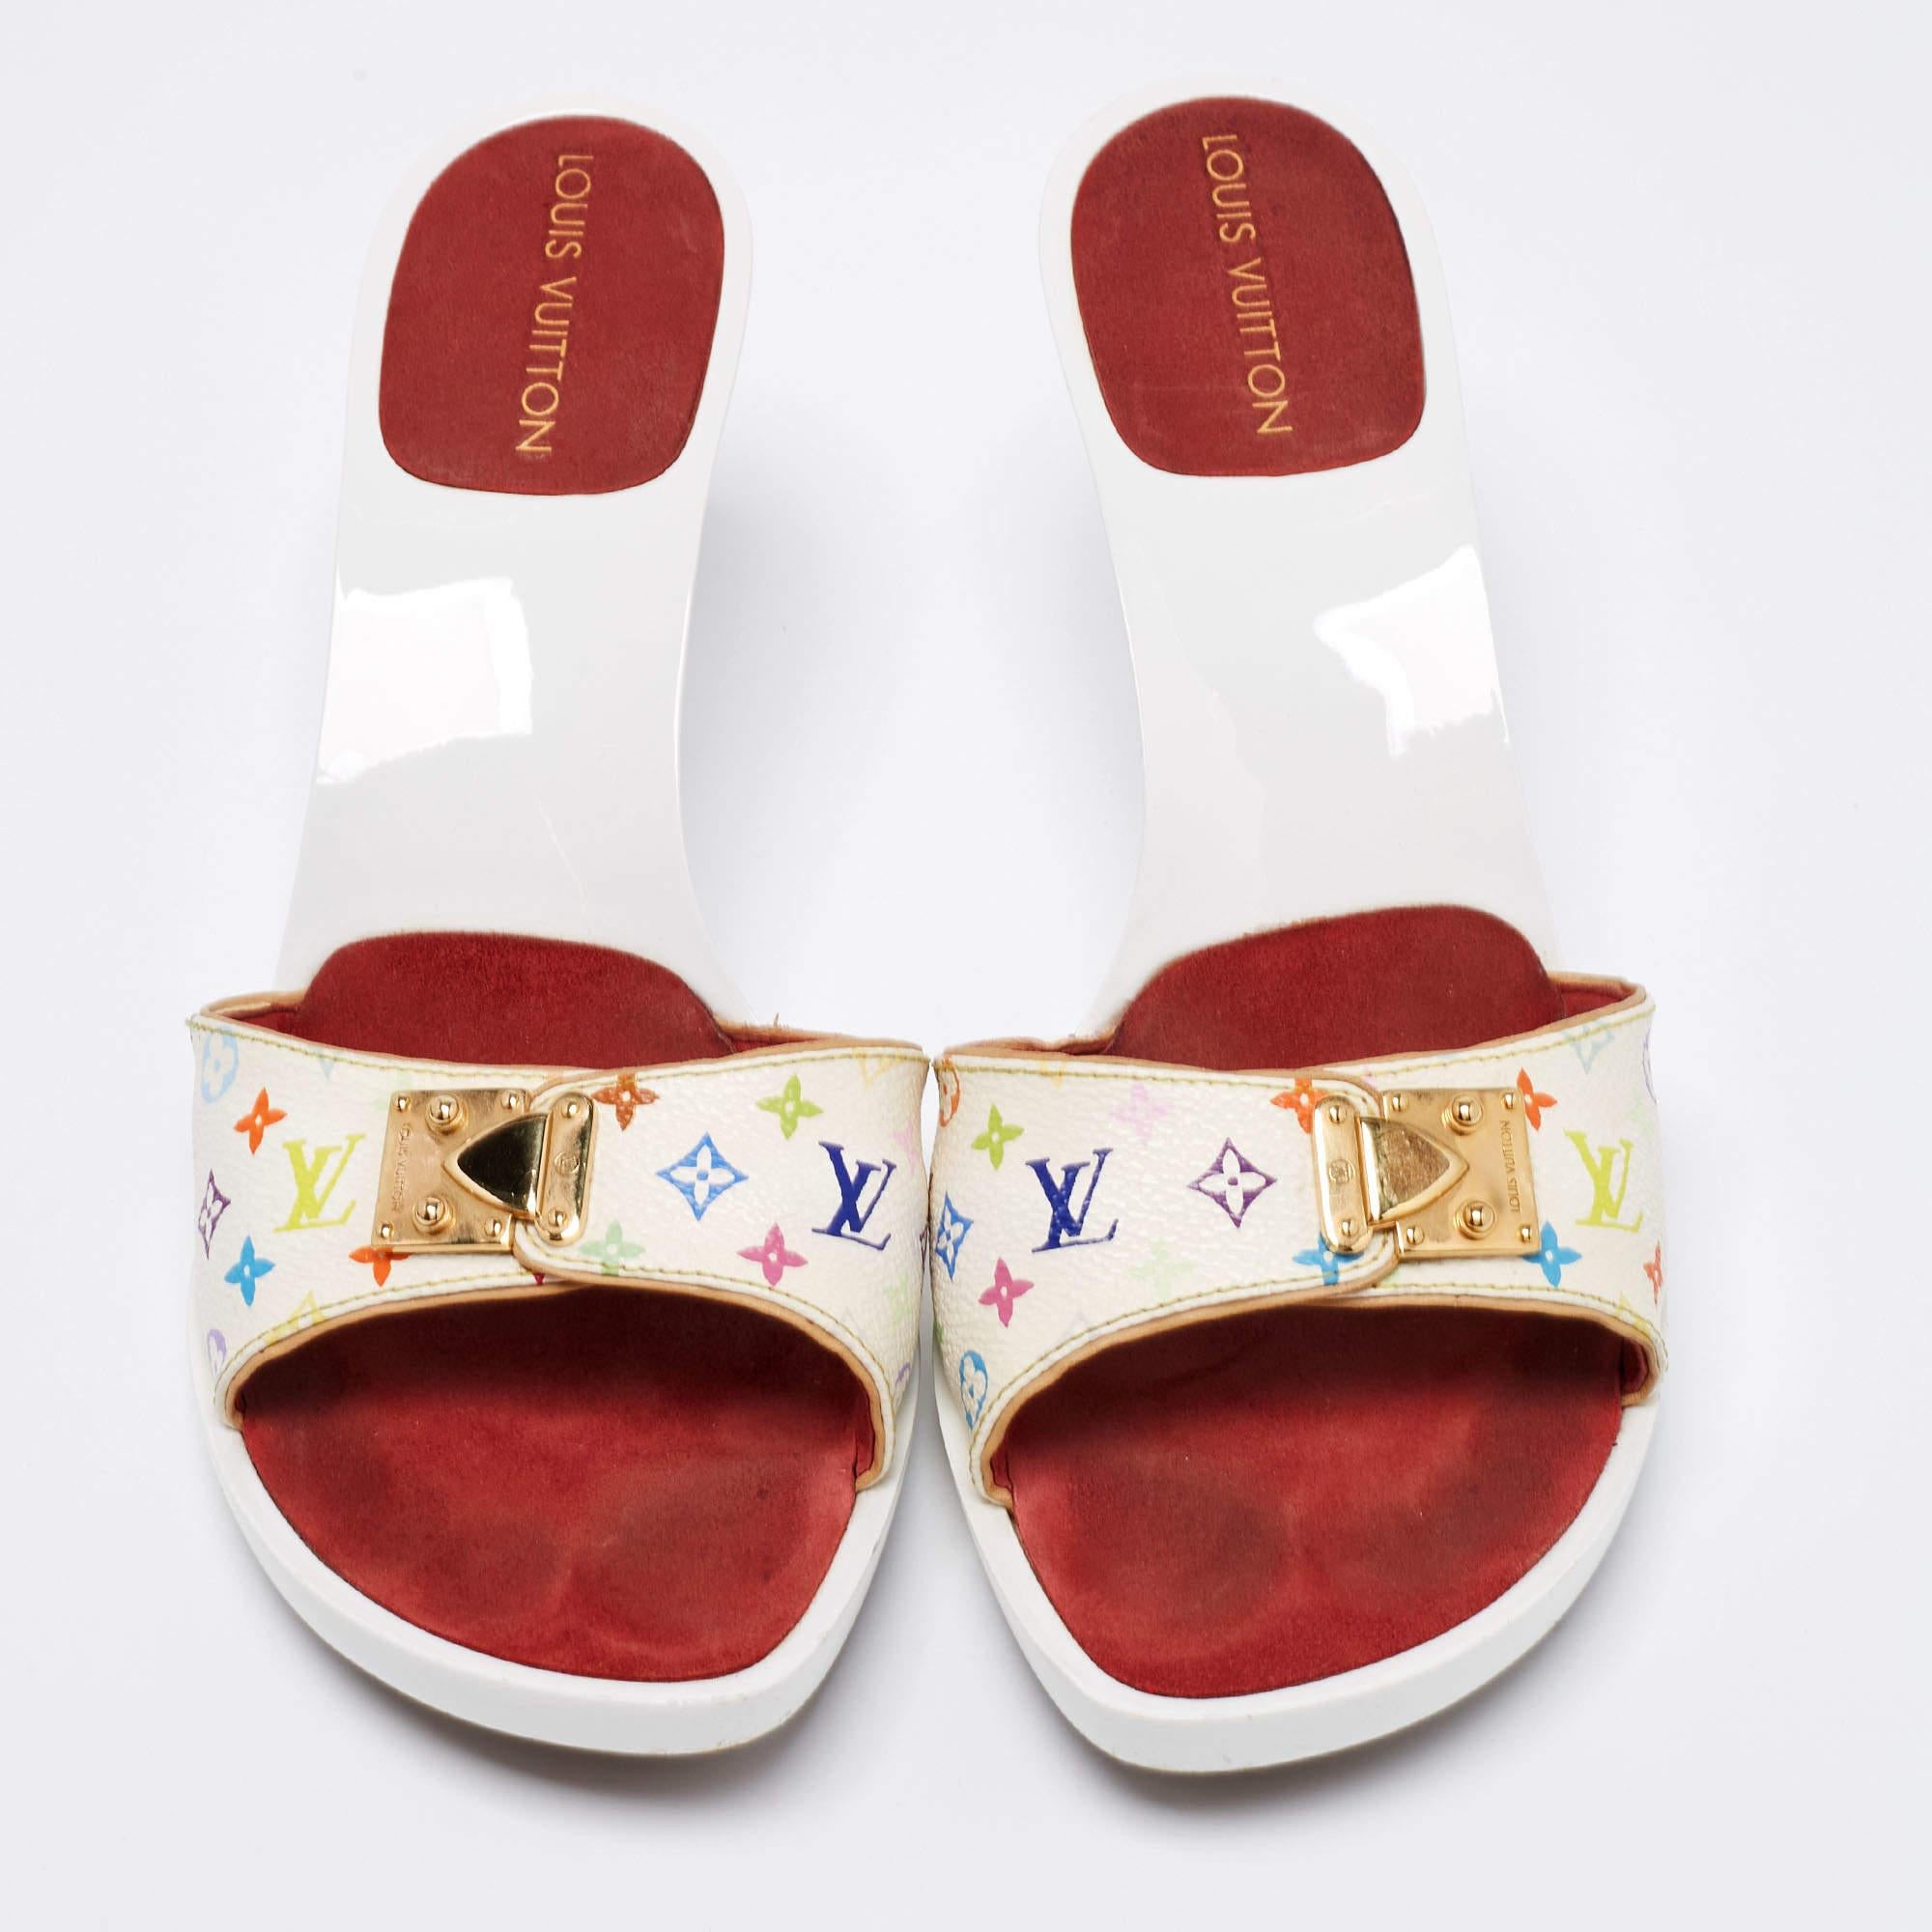 Instantly recognizable, truly LV, and super comfortable, these slide sandals will be investment-worthy. They have been made using the signature Multicolore monogram canvas and elevated by the iconic S-lock on the uppers that harks back to the